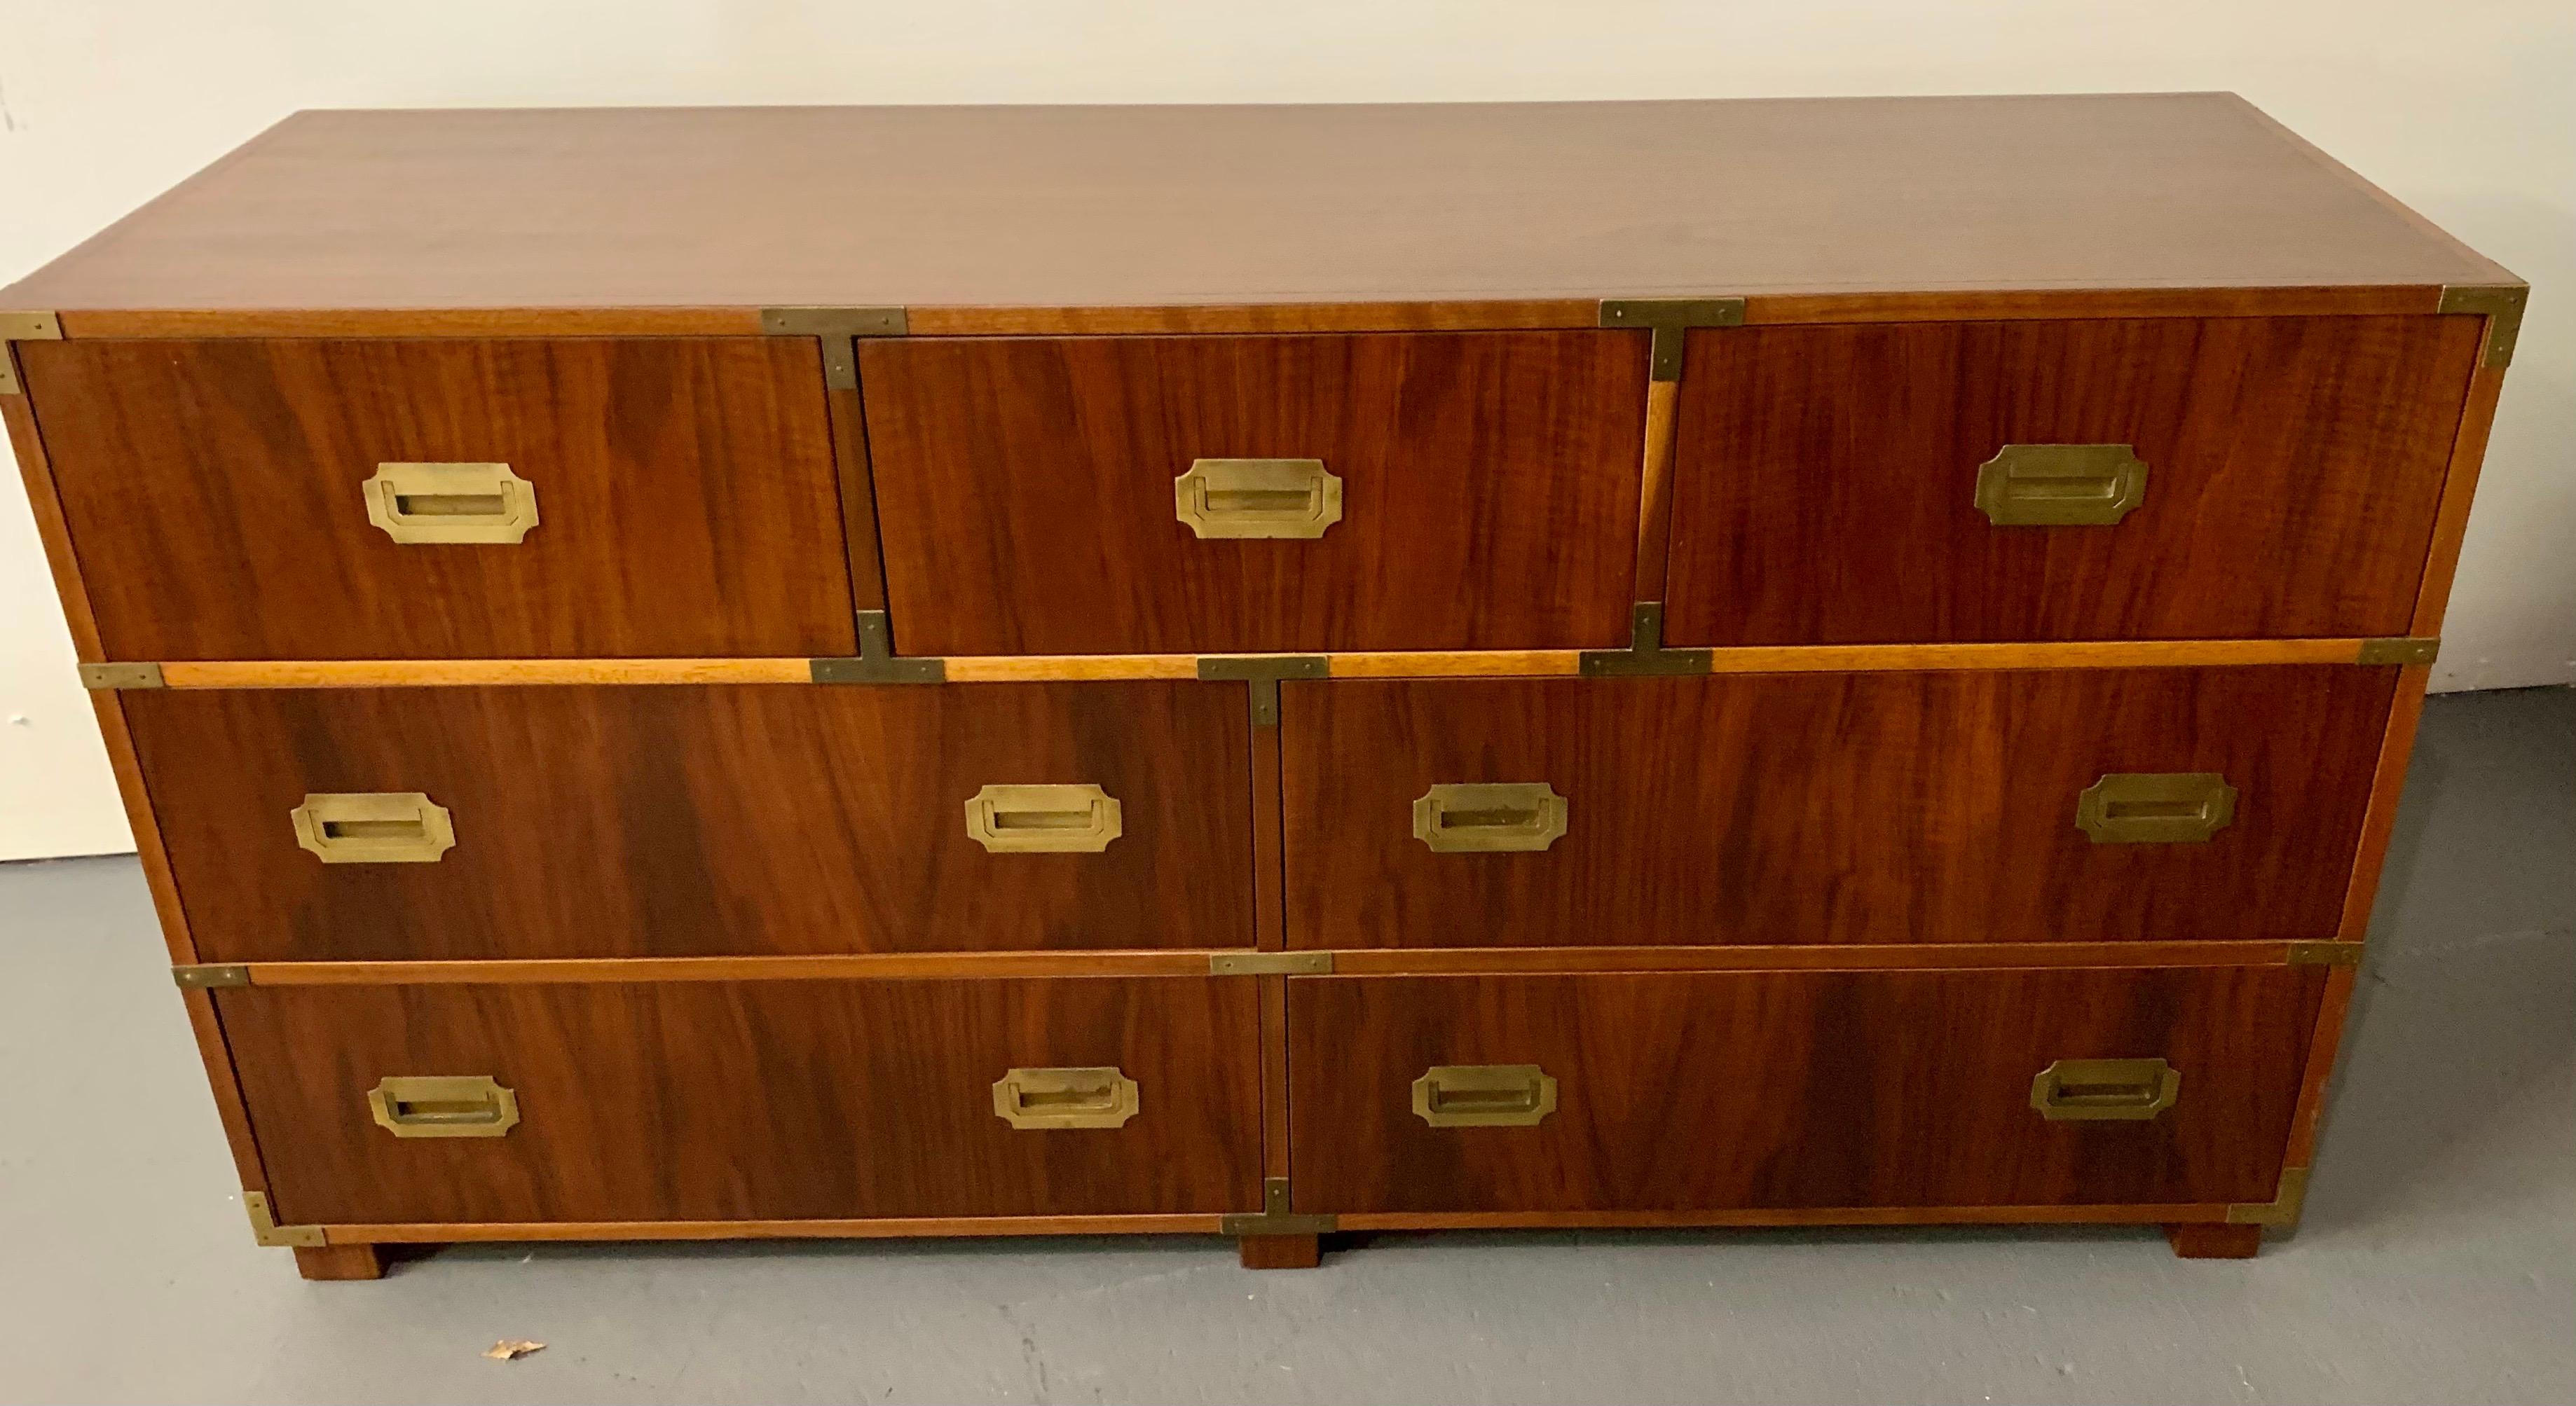 Vintage campaign style dresser with seven dovetailed drawers and brass hardware and pulls. Solid high-quality construction by Baker Furniture. All Baker hallmarks are present. Note we have the smaller companion dresser also exclusively on 1stDibs.